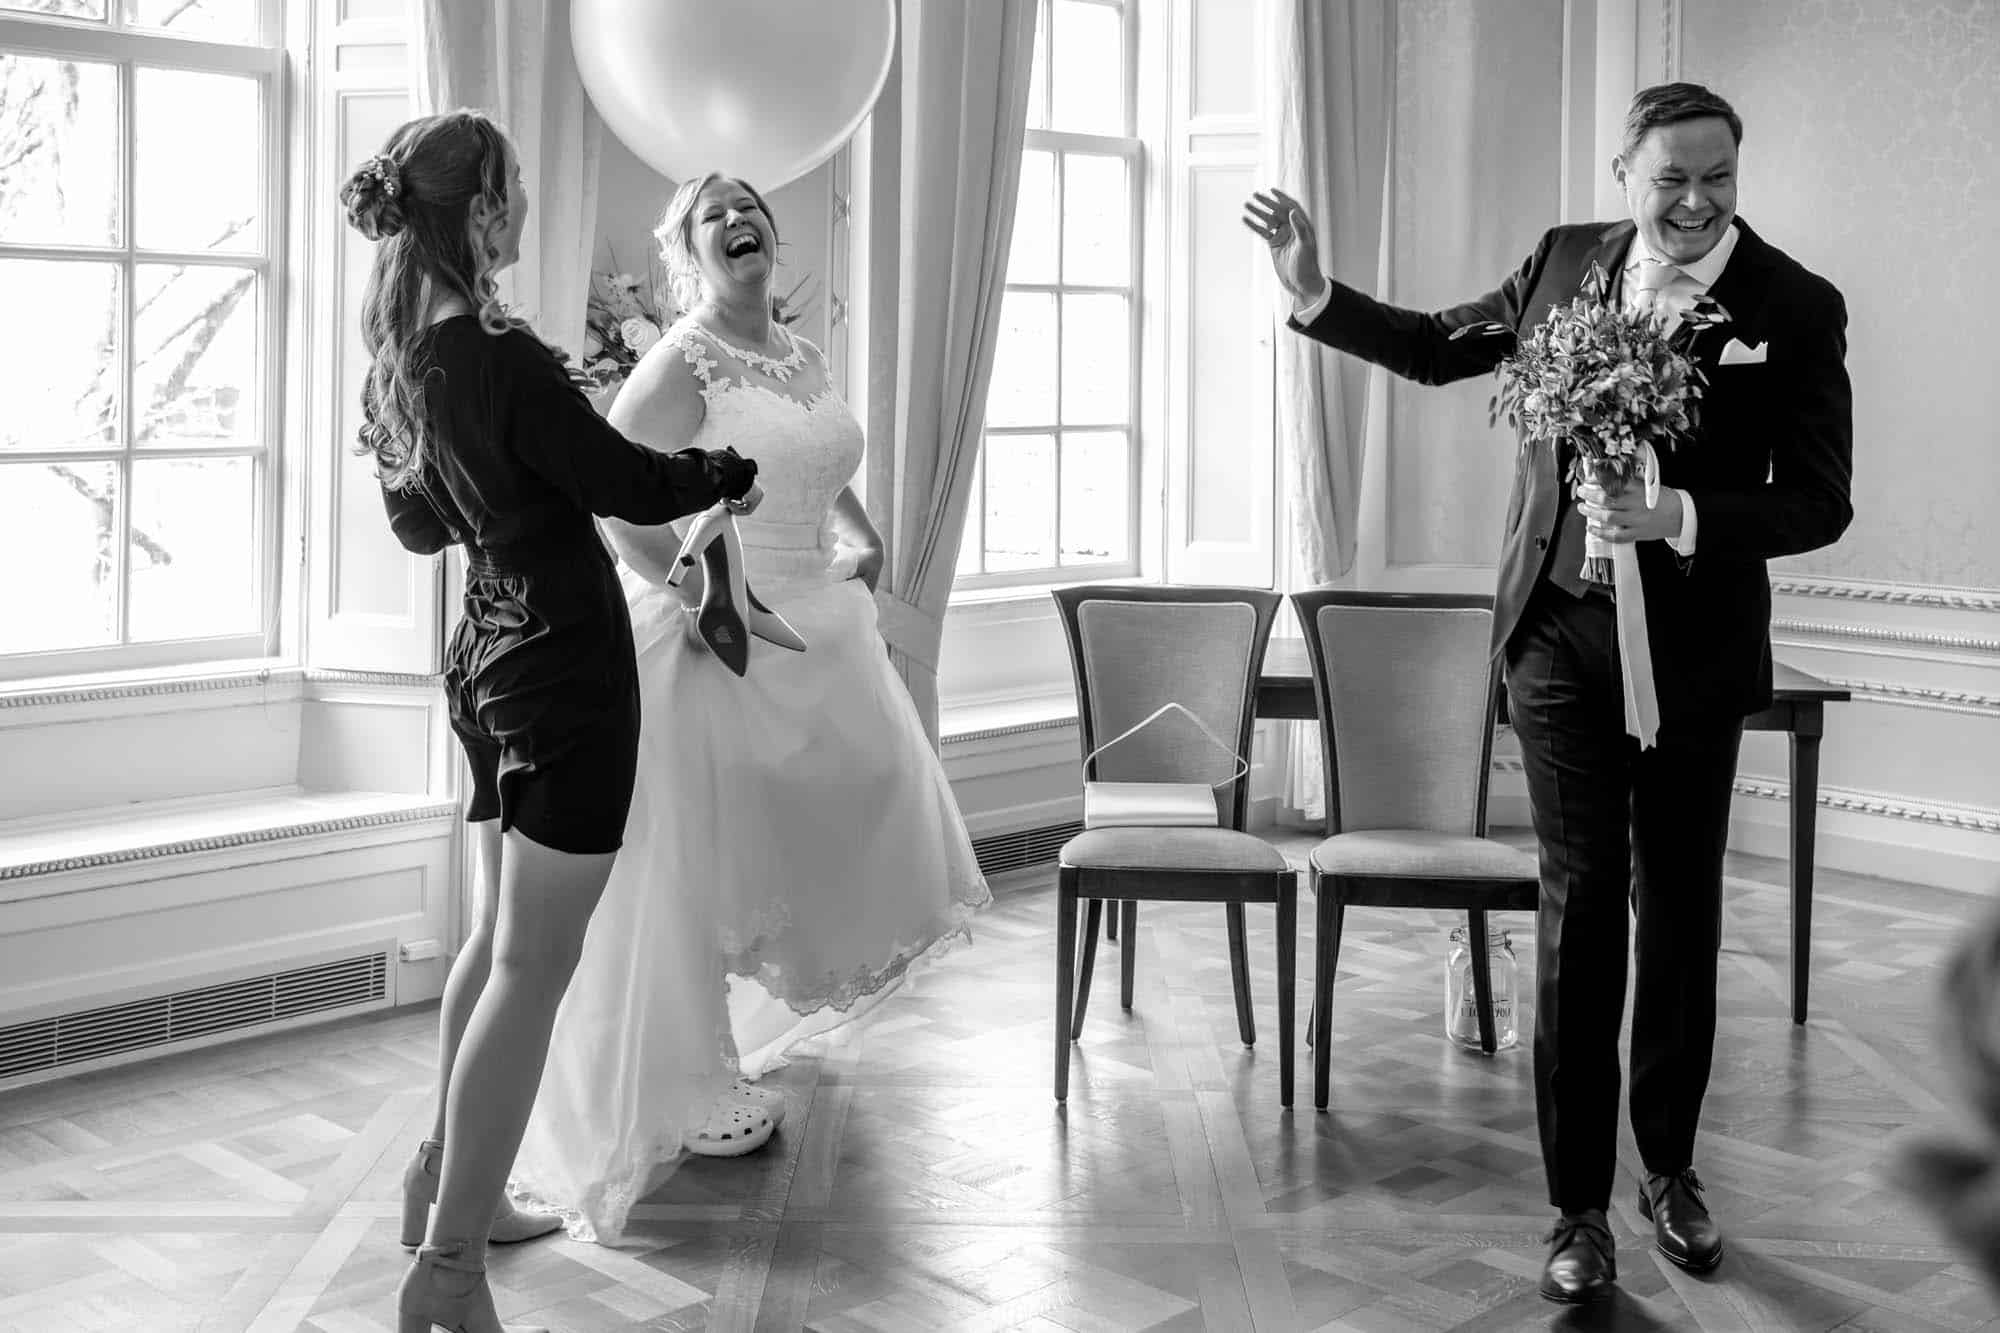 A bride and groom hold balloons in a room, creating extraordinary wedding photos.